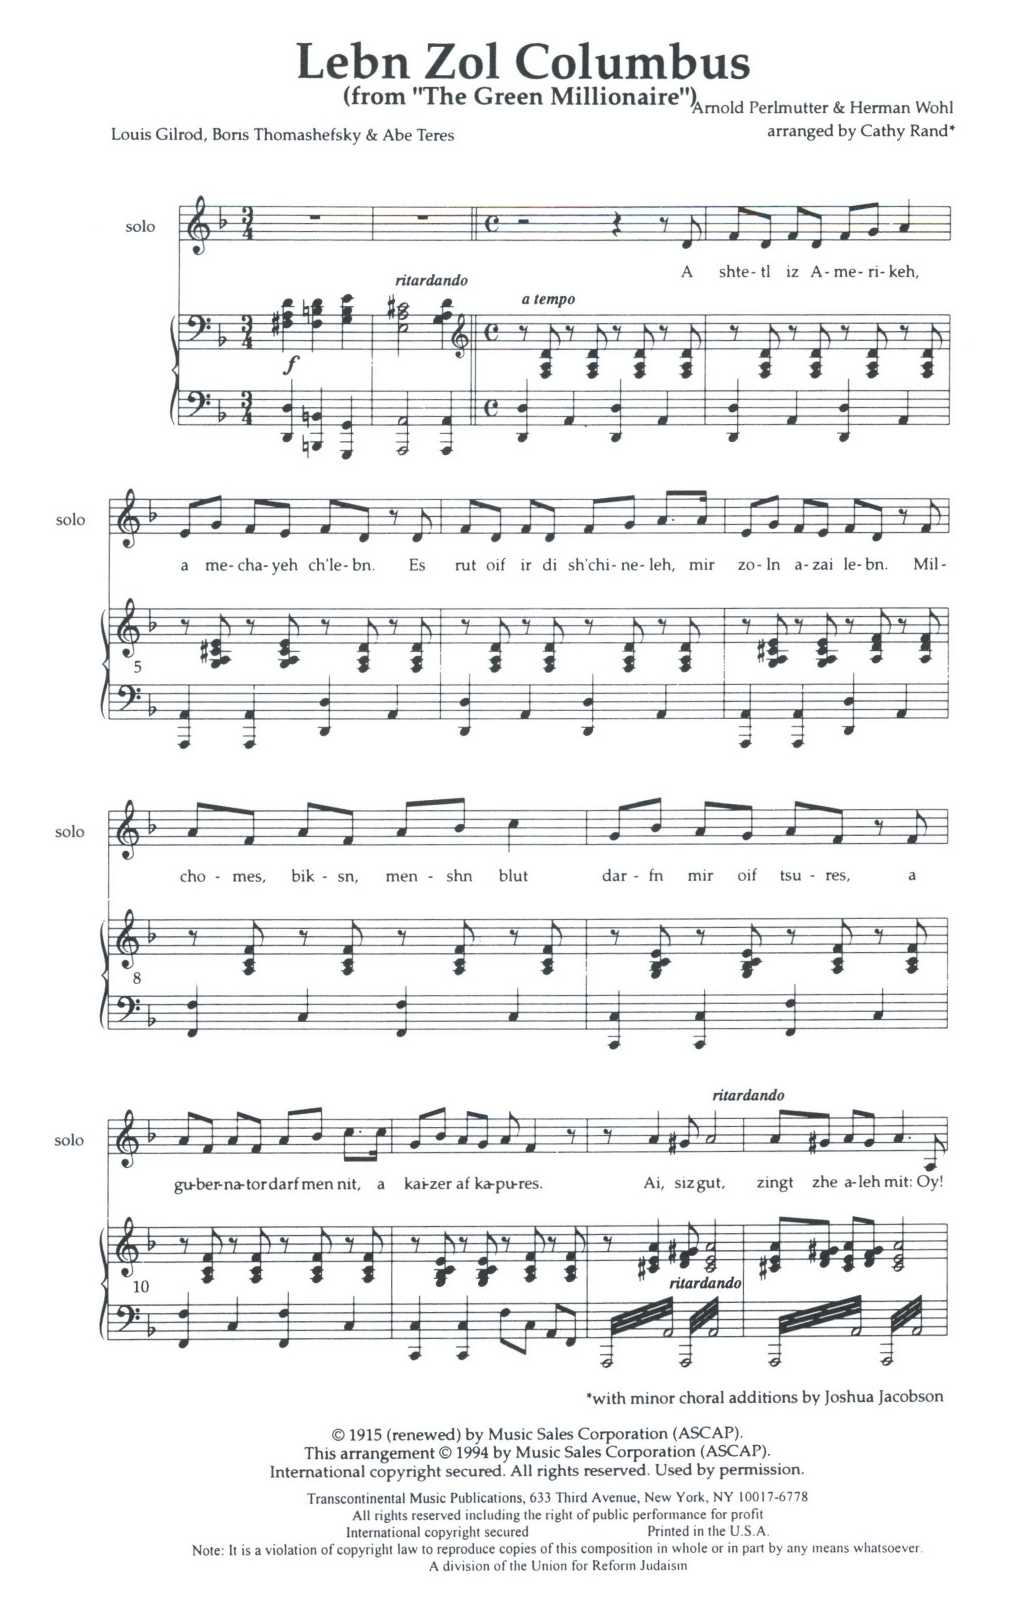 Aaron Perlmutter Lebn Zol Columbus Solo (high), Piano sheet music notes and chords. Download Printable PDF.